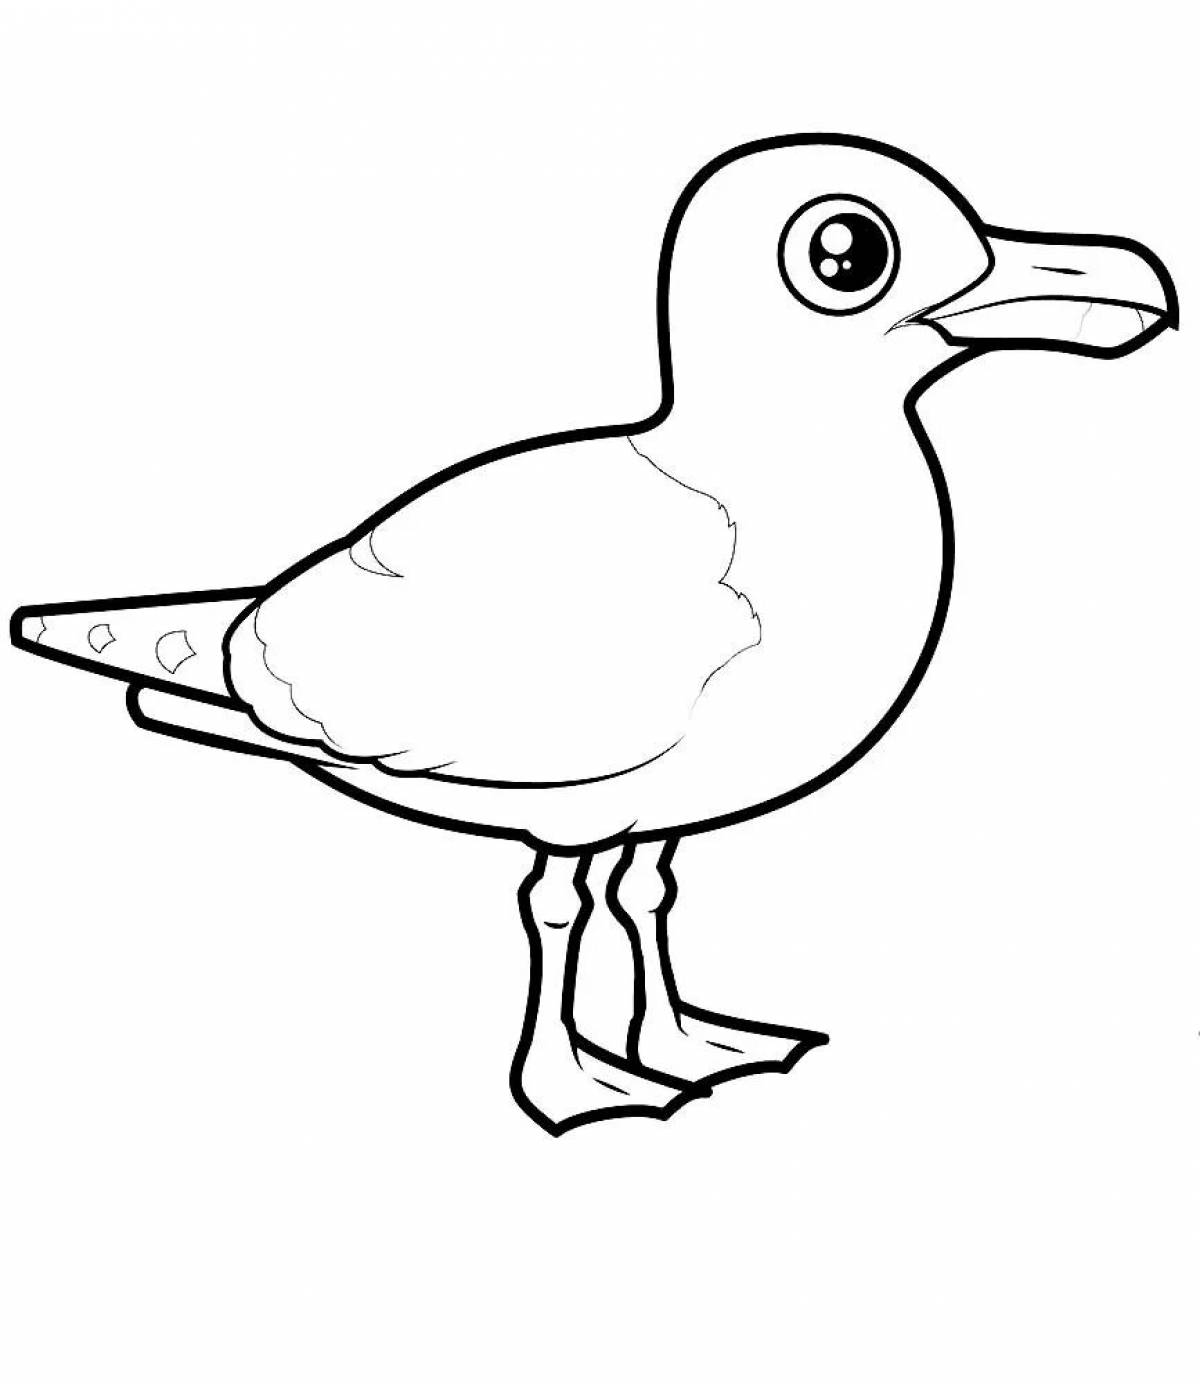 Seagull for kids #2